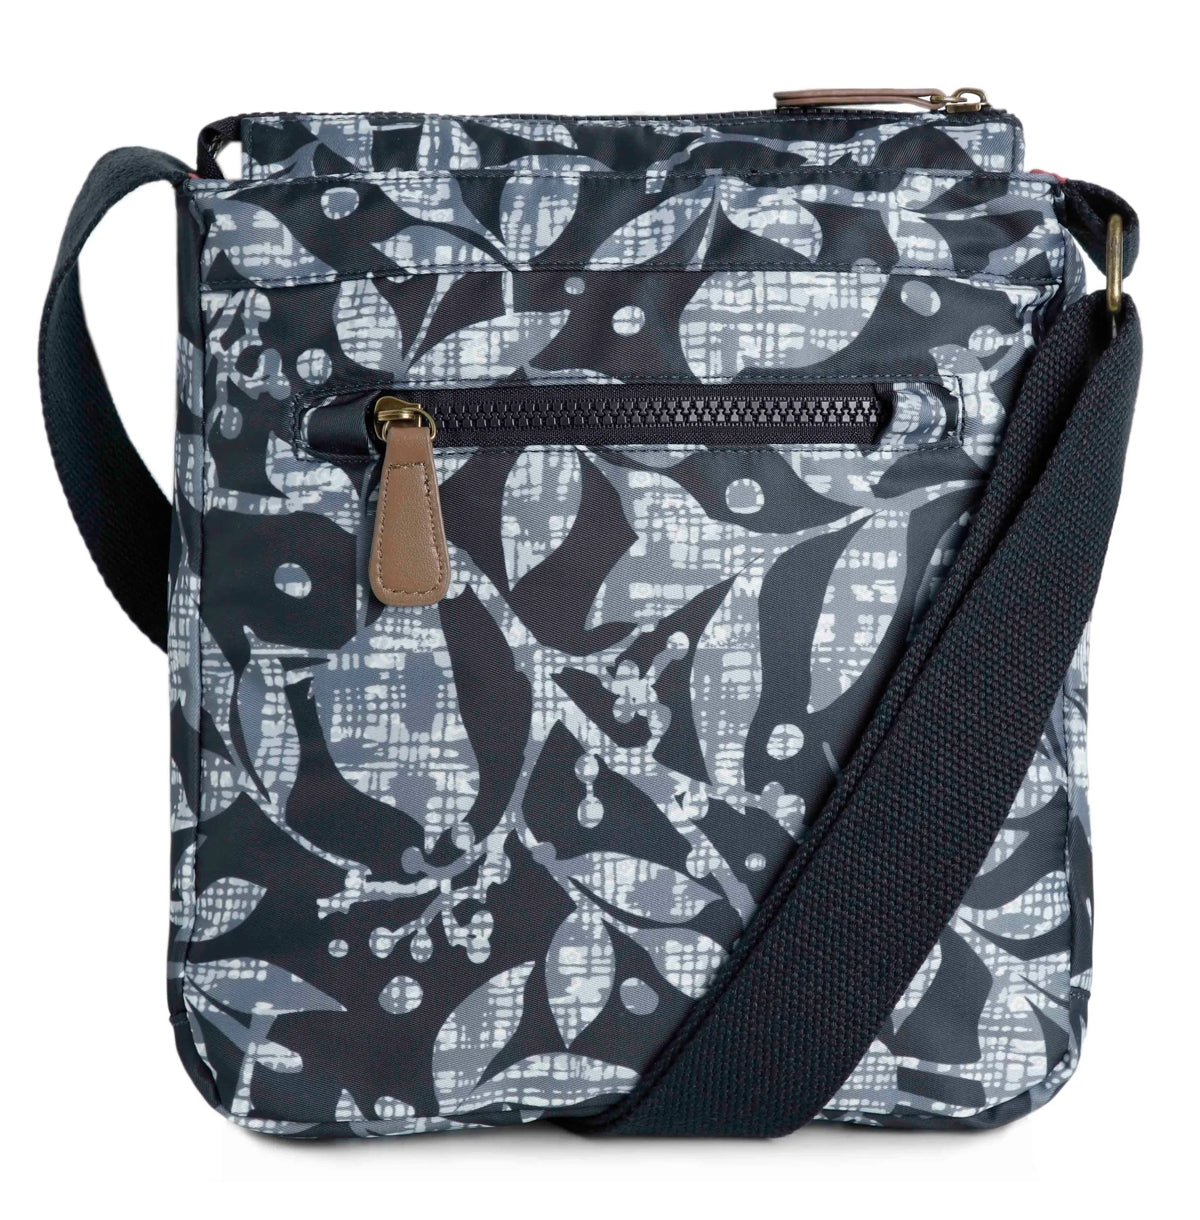 Floral printed Kait cross body bag from Weird Fish in Navy with a back zip pocket.